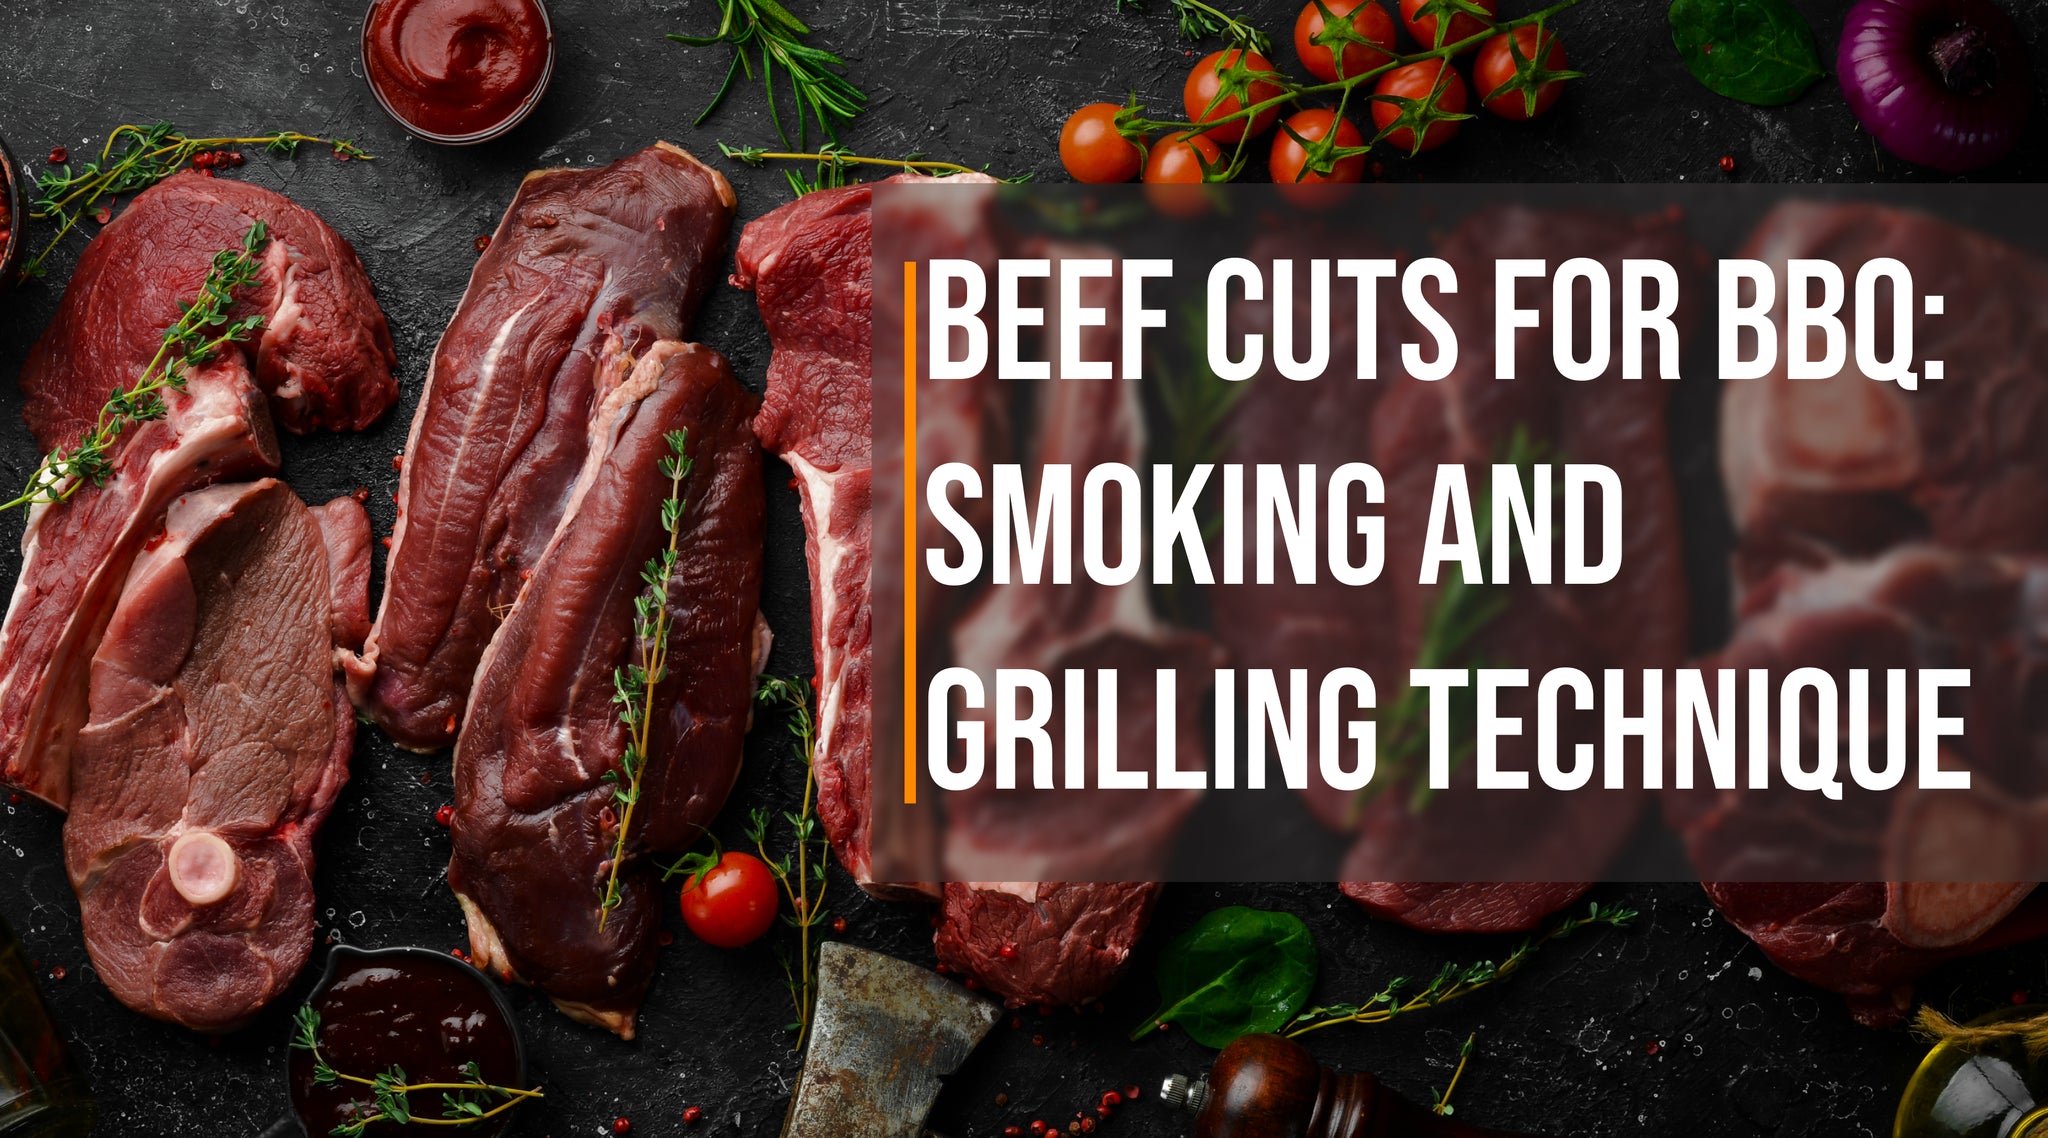 Beef Cuts for BBQ: Smoking and Grilling Technique